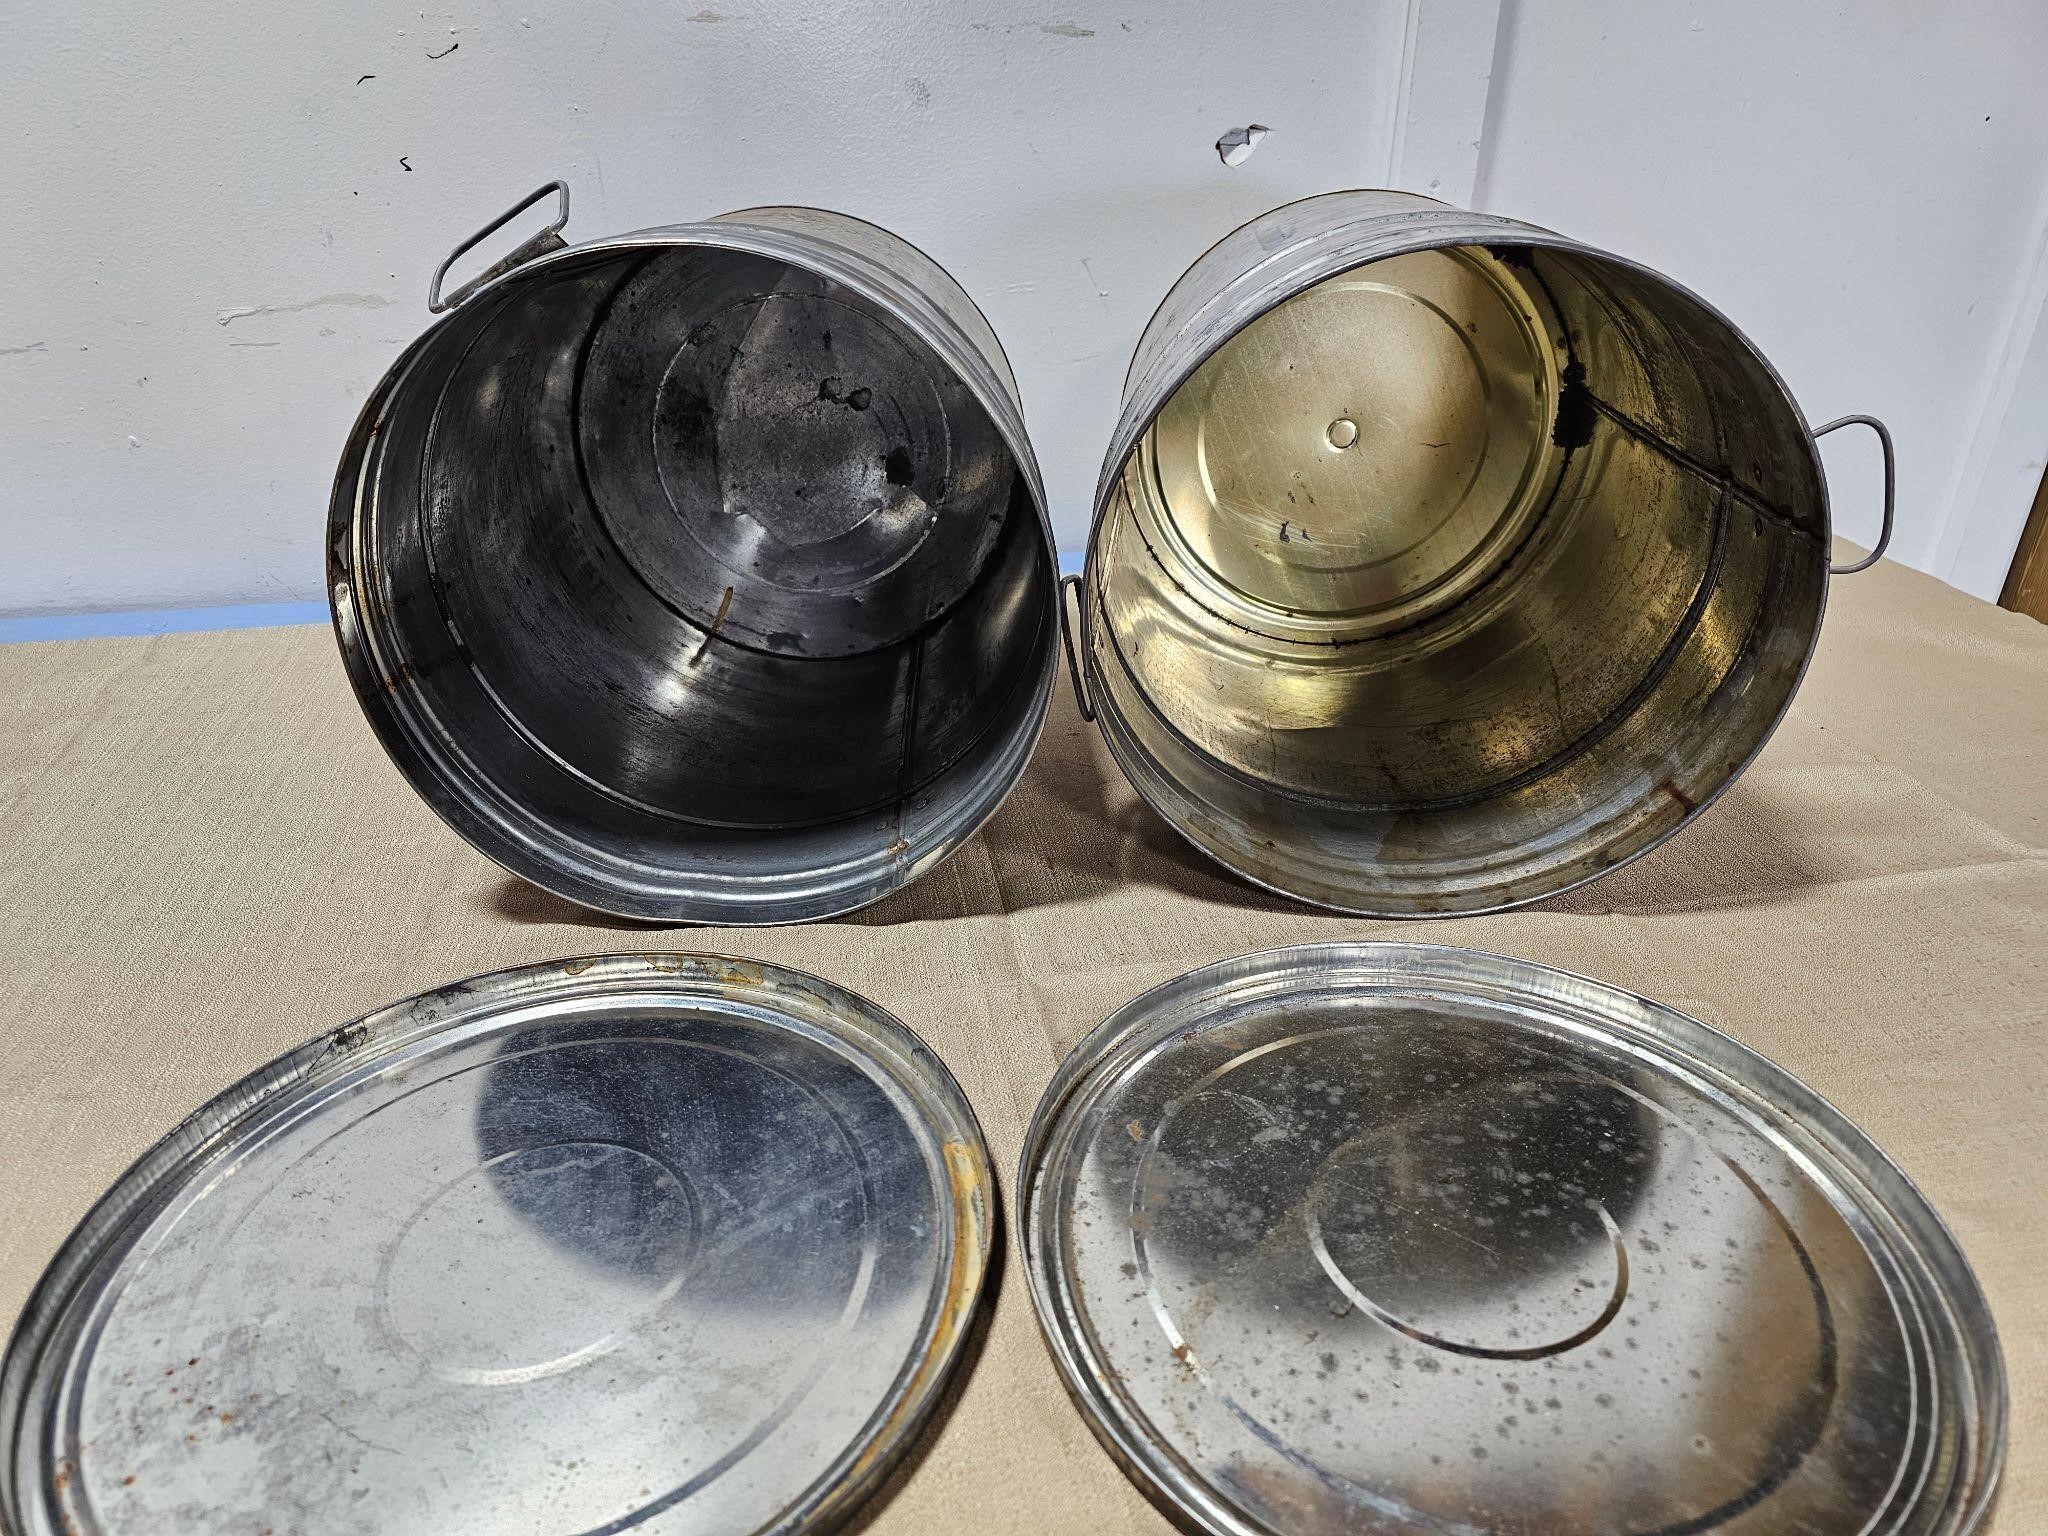 old tin cans found in attic - film?seed?chips?